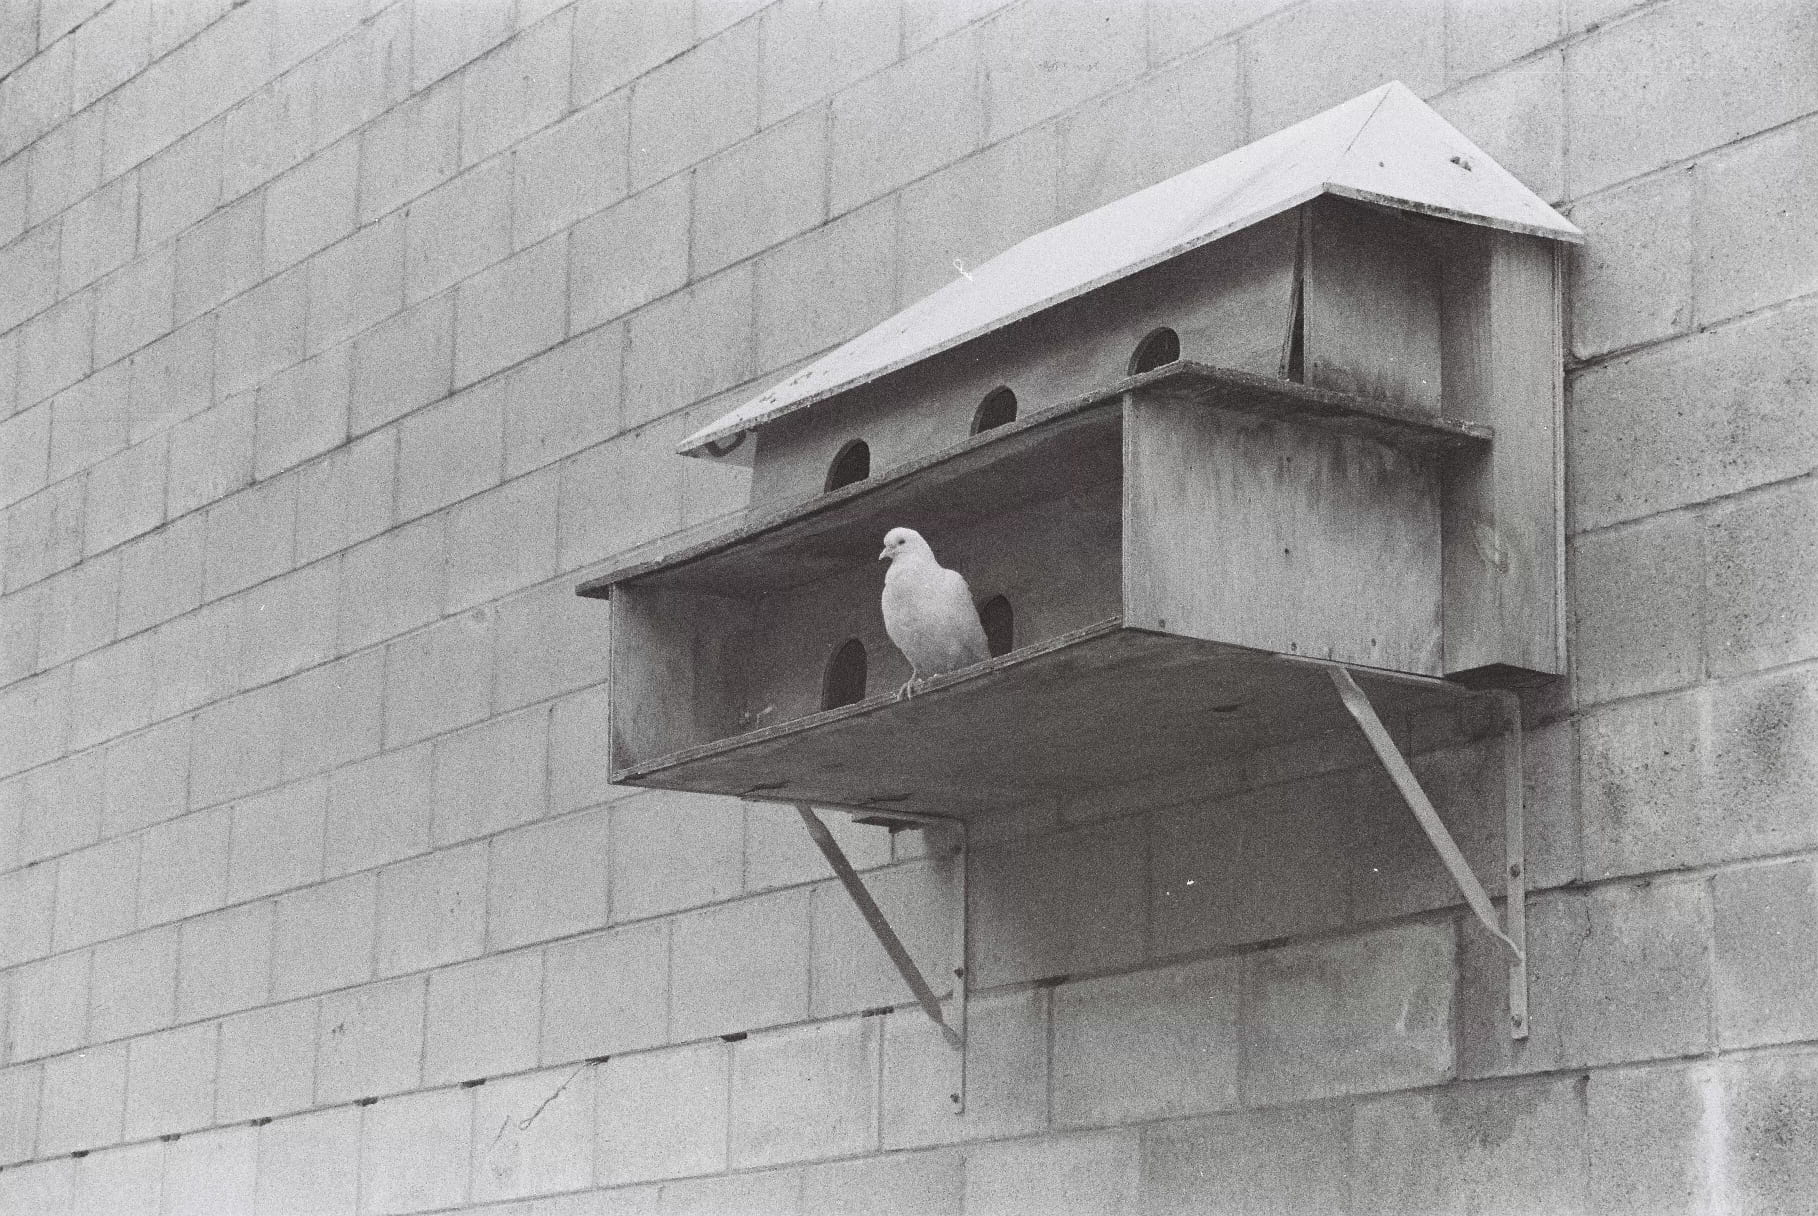 Close up of a bird house, with a bird sitting in it